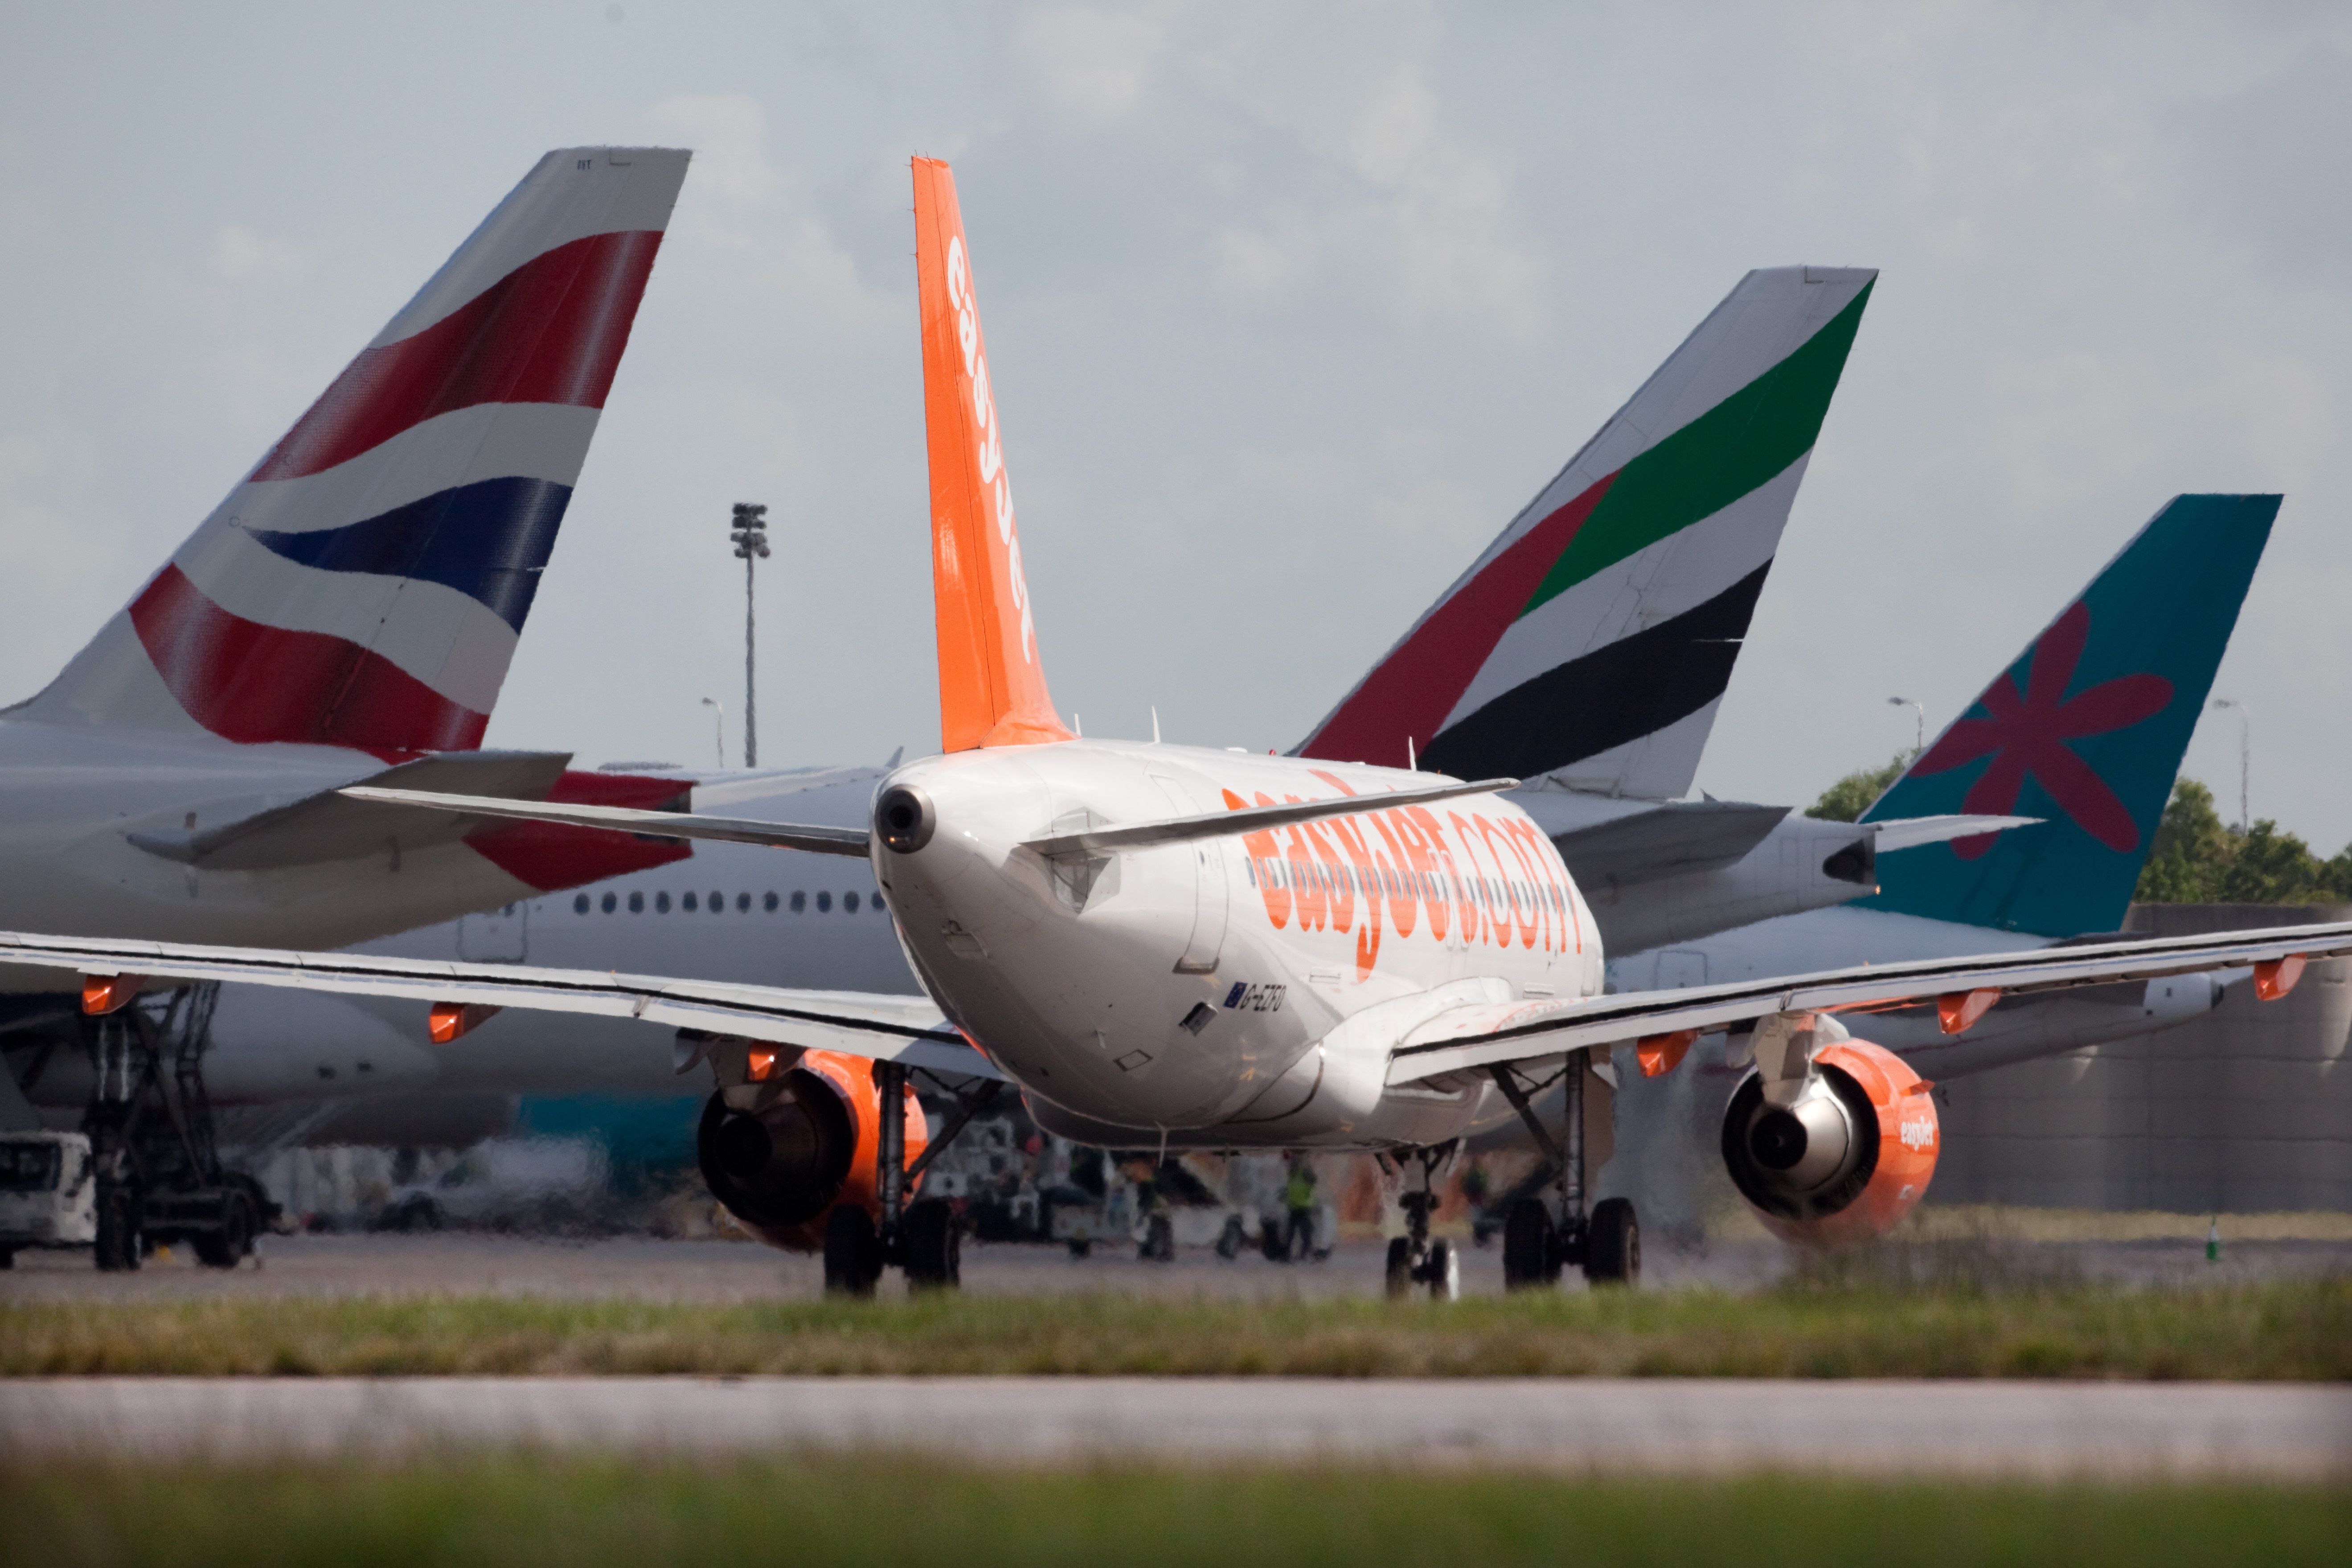 gatwick-tailfins - EasyJet Airbus taxiing by British Airways, Emirates and another widebody at London Gatwick